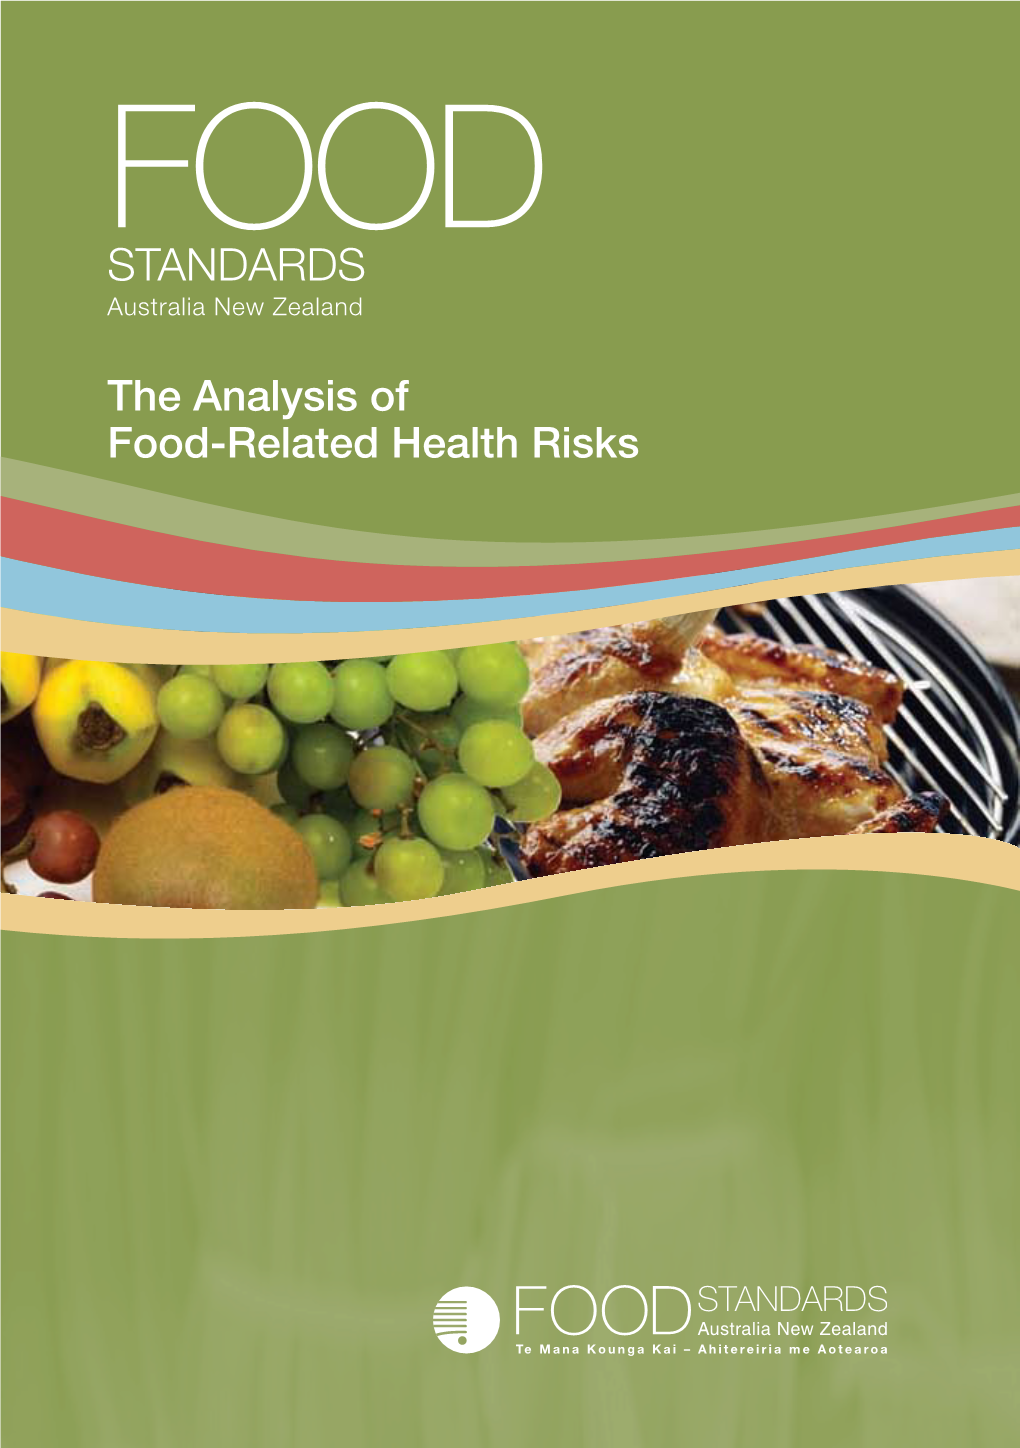 The Analysis of Food-Related Health Risks FOOD STANDARDS Australia New Zealand the Analysis of Food-Related Health Risks FOOD STANDARDS AUSTRALIA NEW ZEALAND